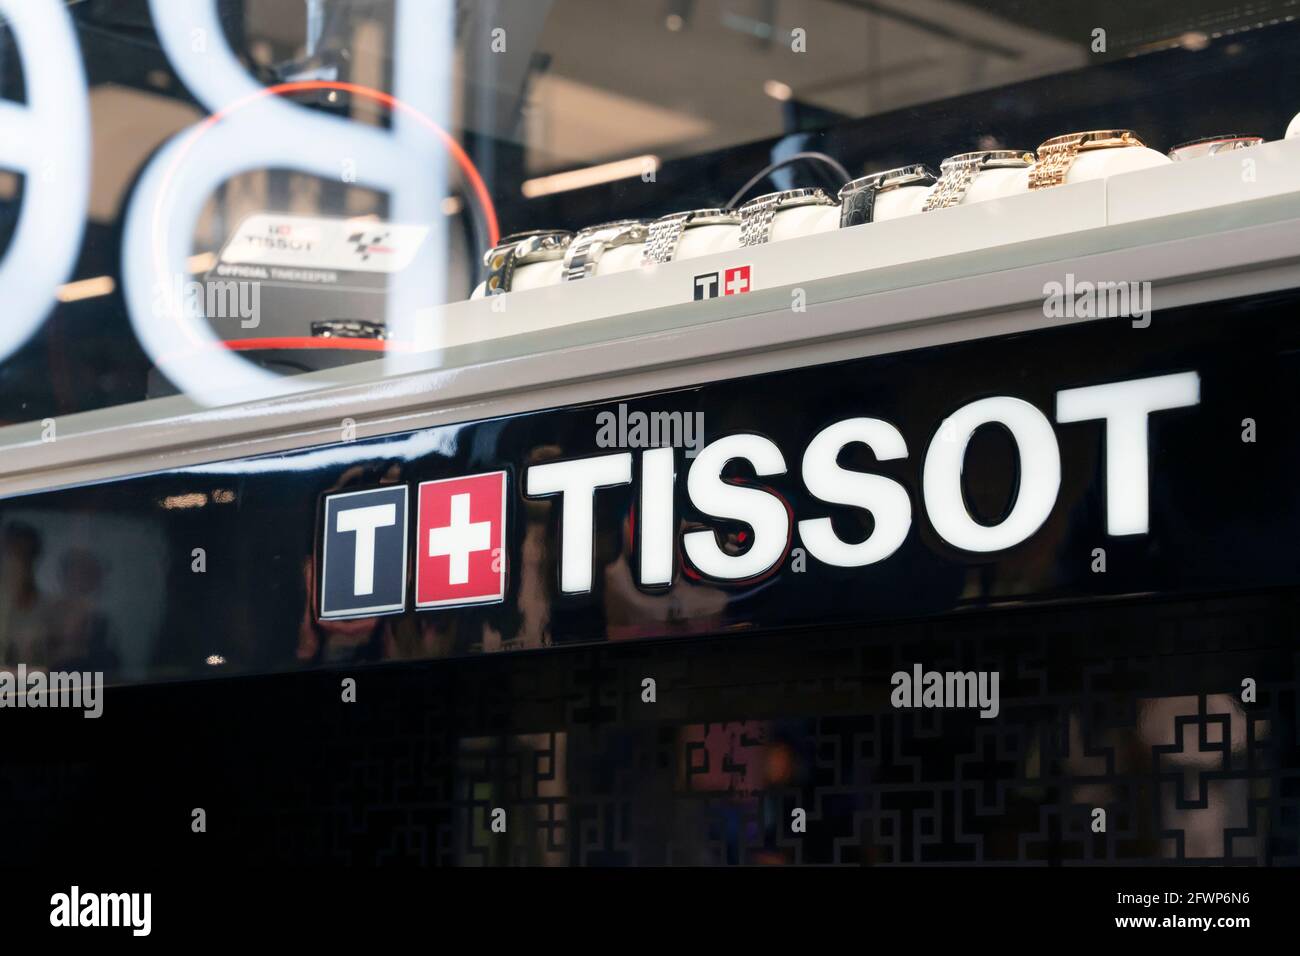 Tissot-brand logo of a Swiss watch on the counter in a shopping center . Krasnoyarsk, Russia, May 15, 2021. Stock Photo